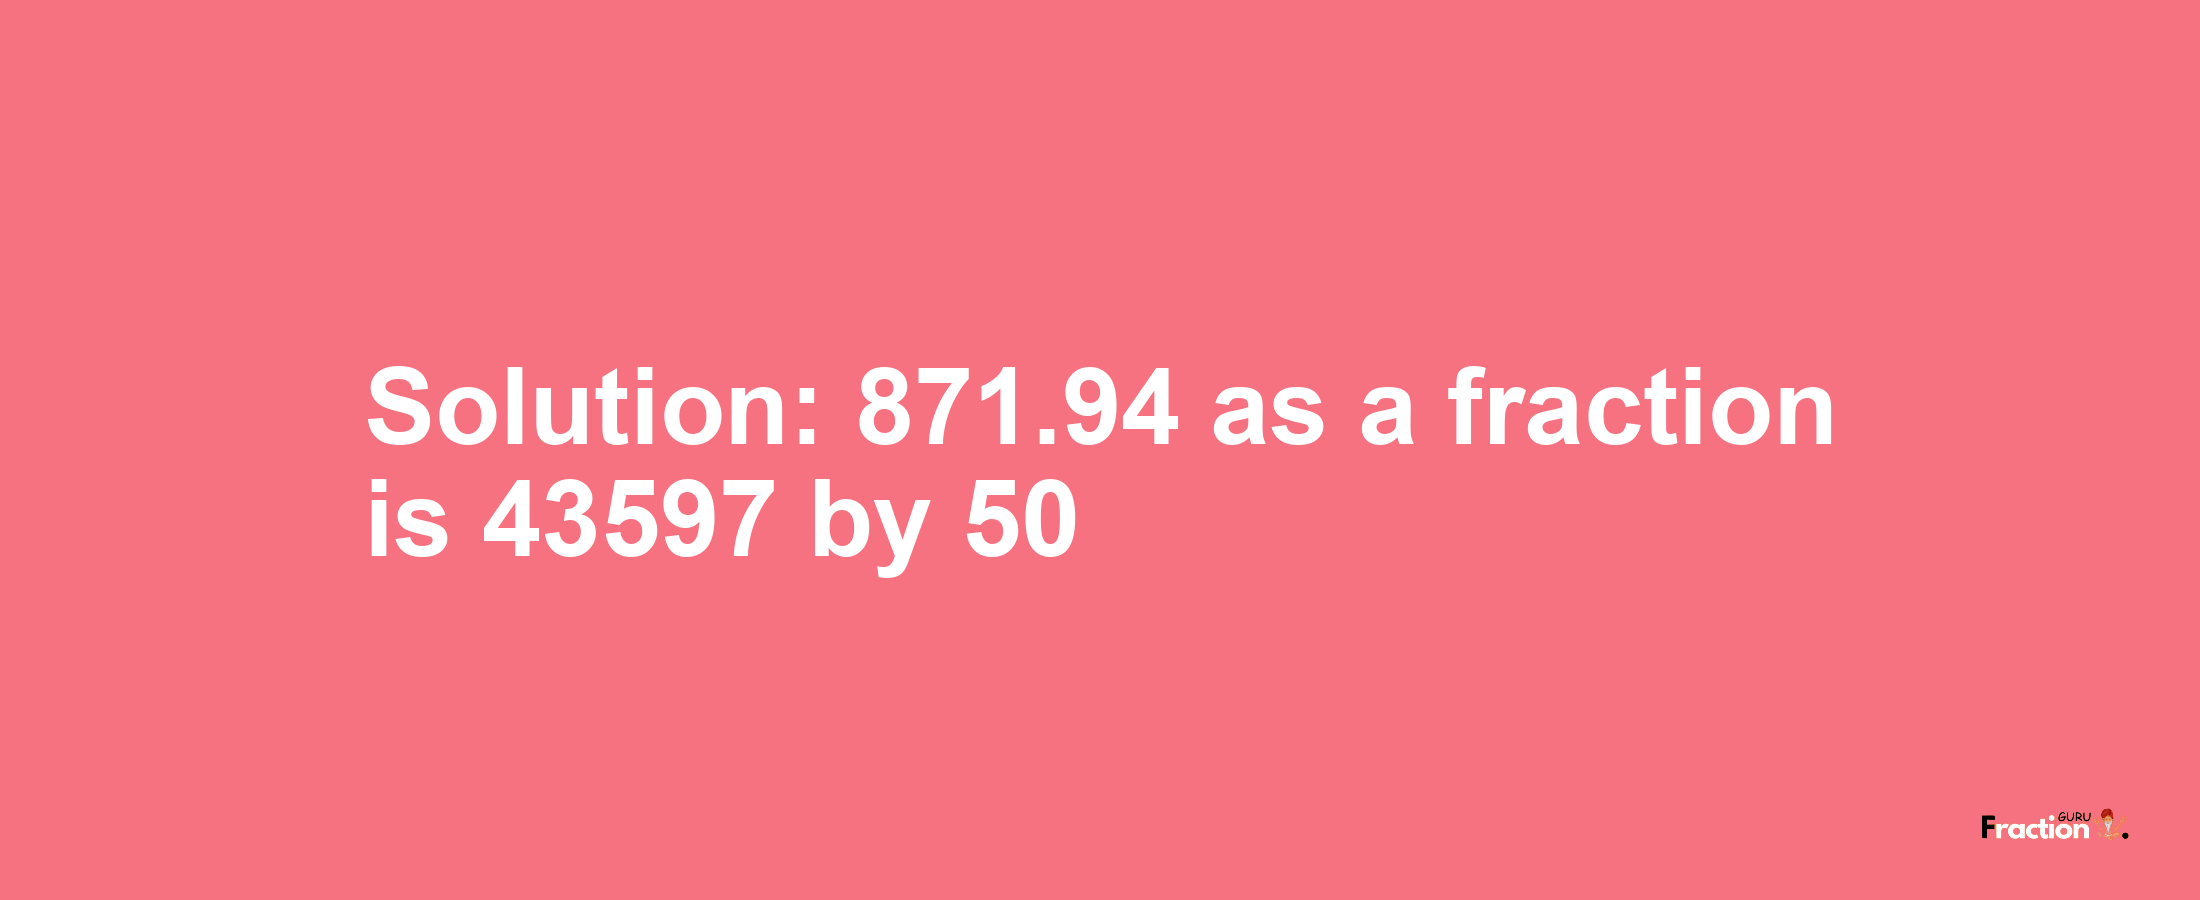 Solution:871.94 as a fraction is 43597/50